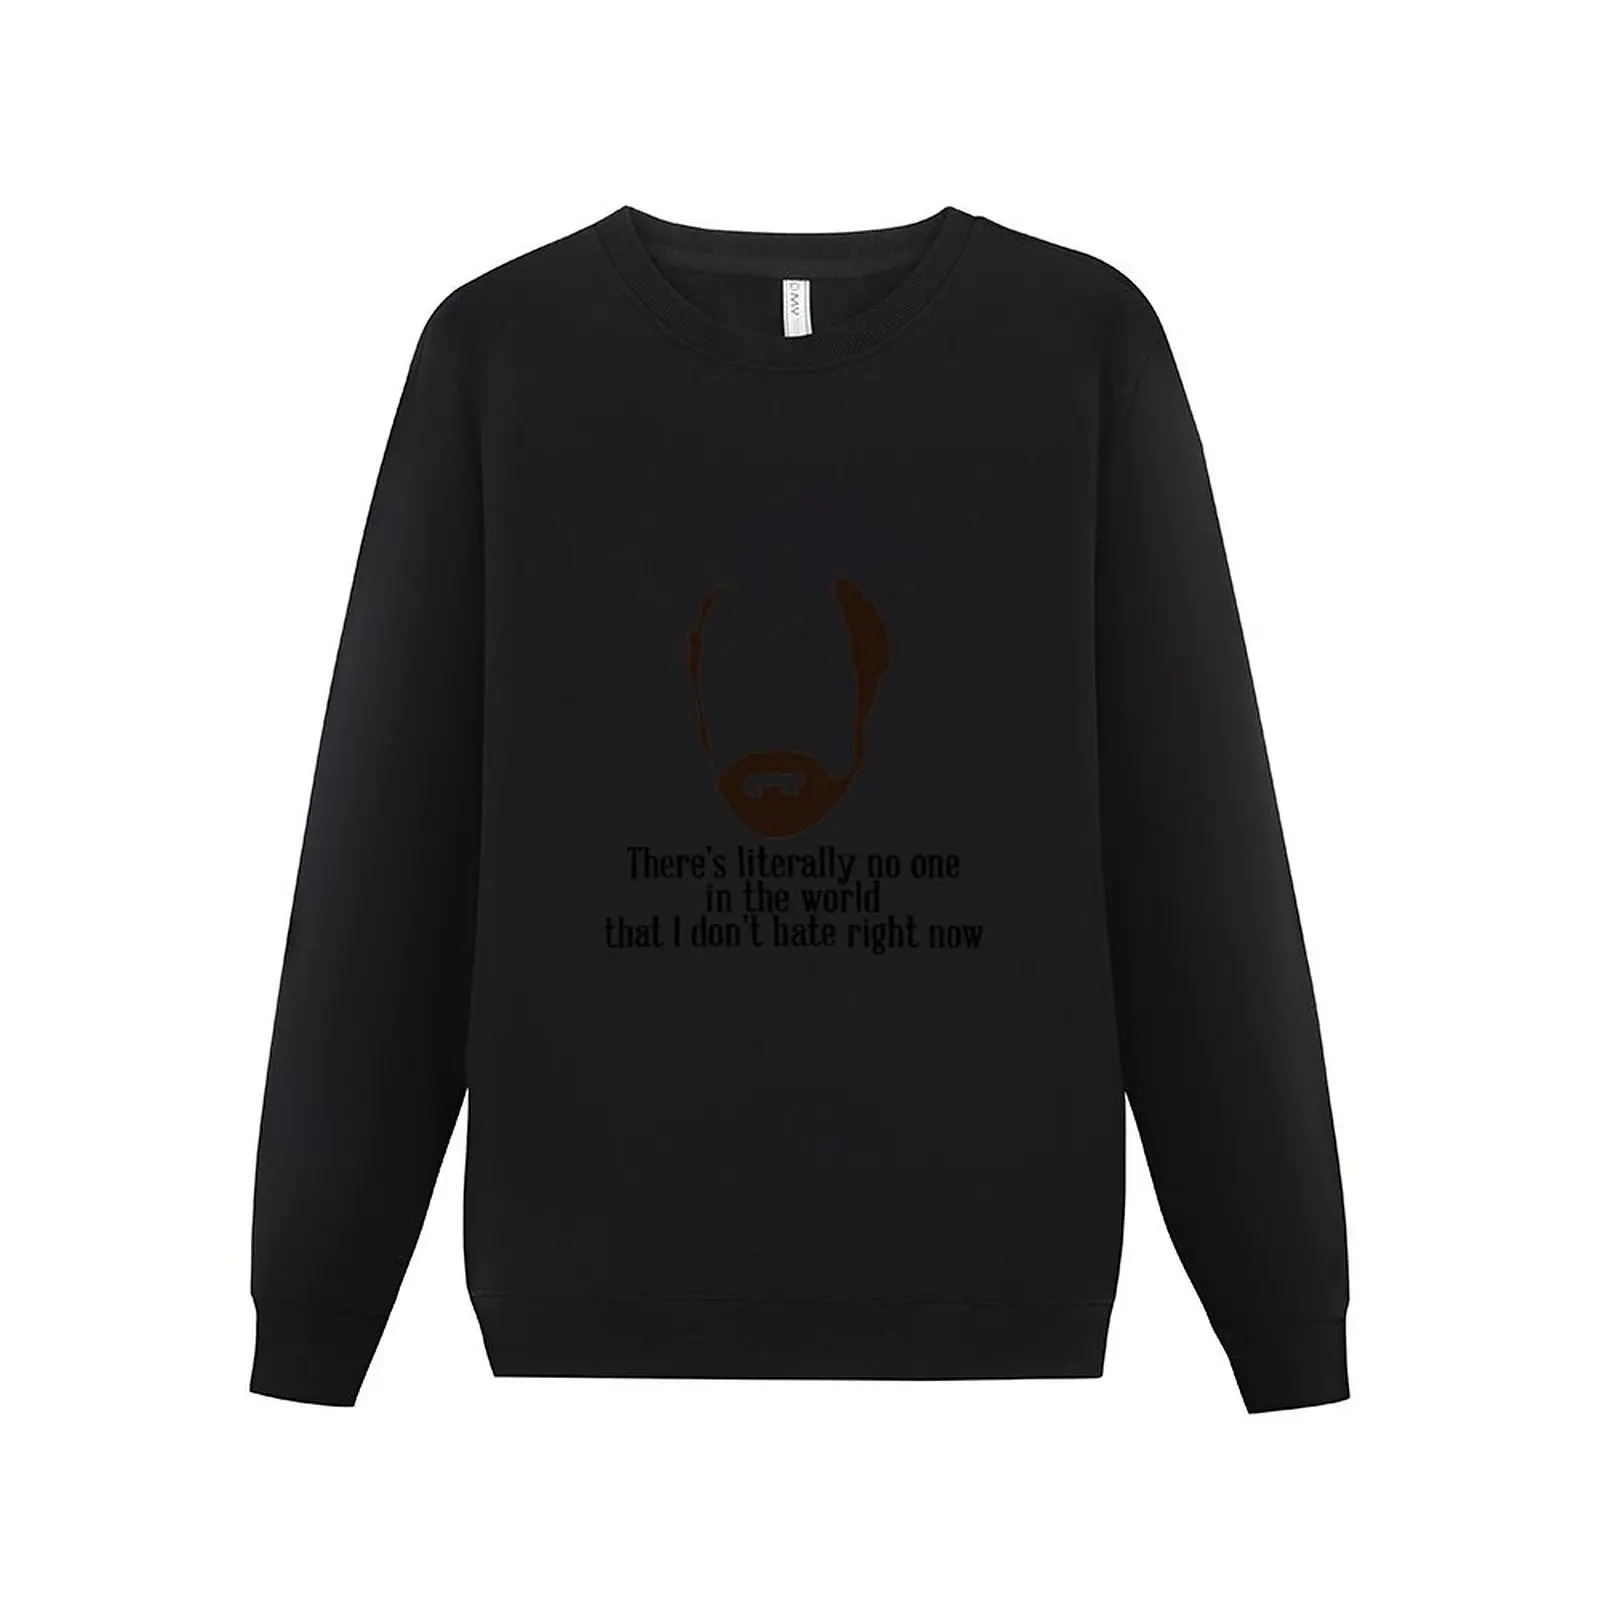 

New Toby Ziegler quote II There's literally no one in the world that I don't hate right now Sweatshirt